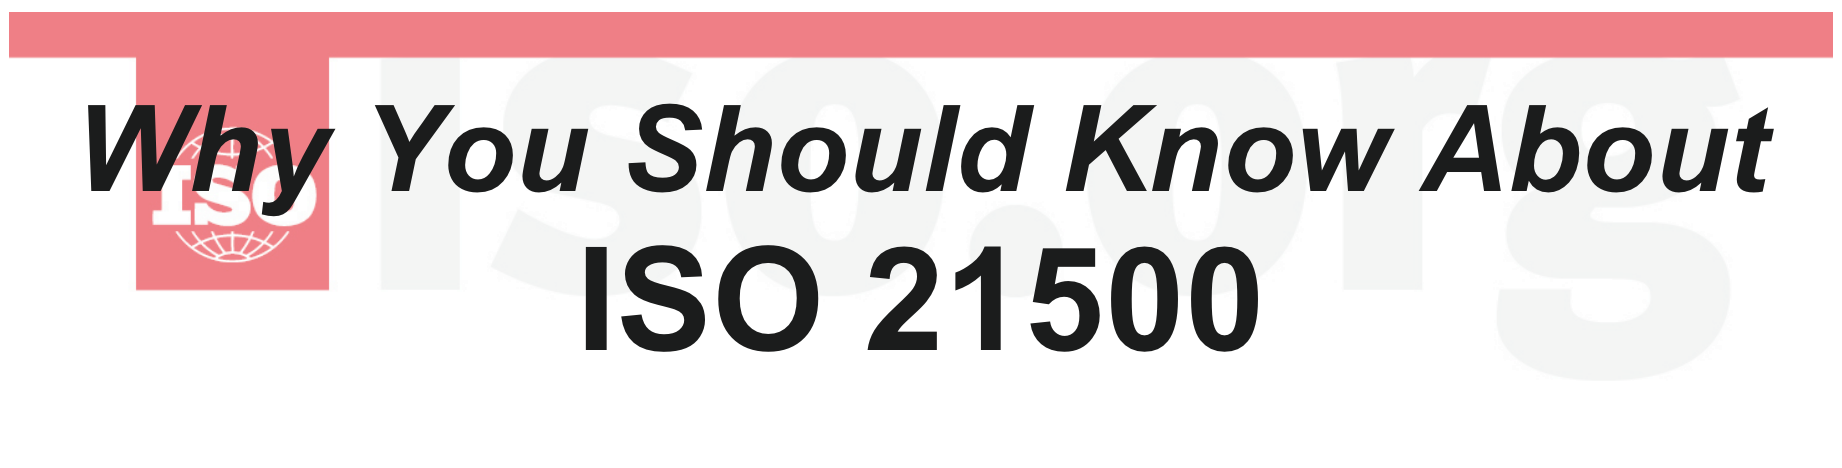 Why You Should Know About ISO 21500